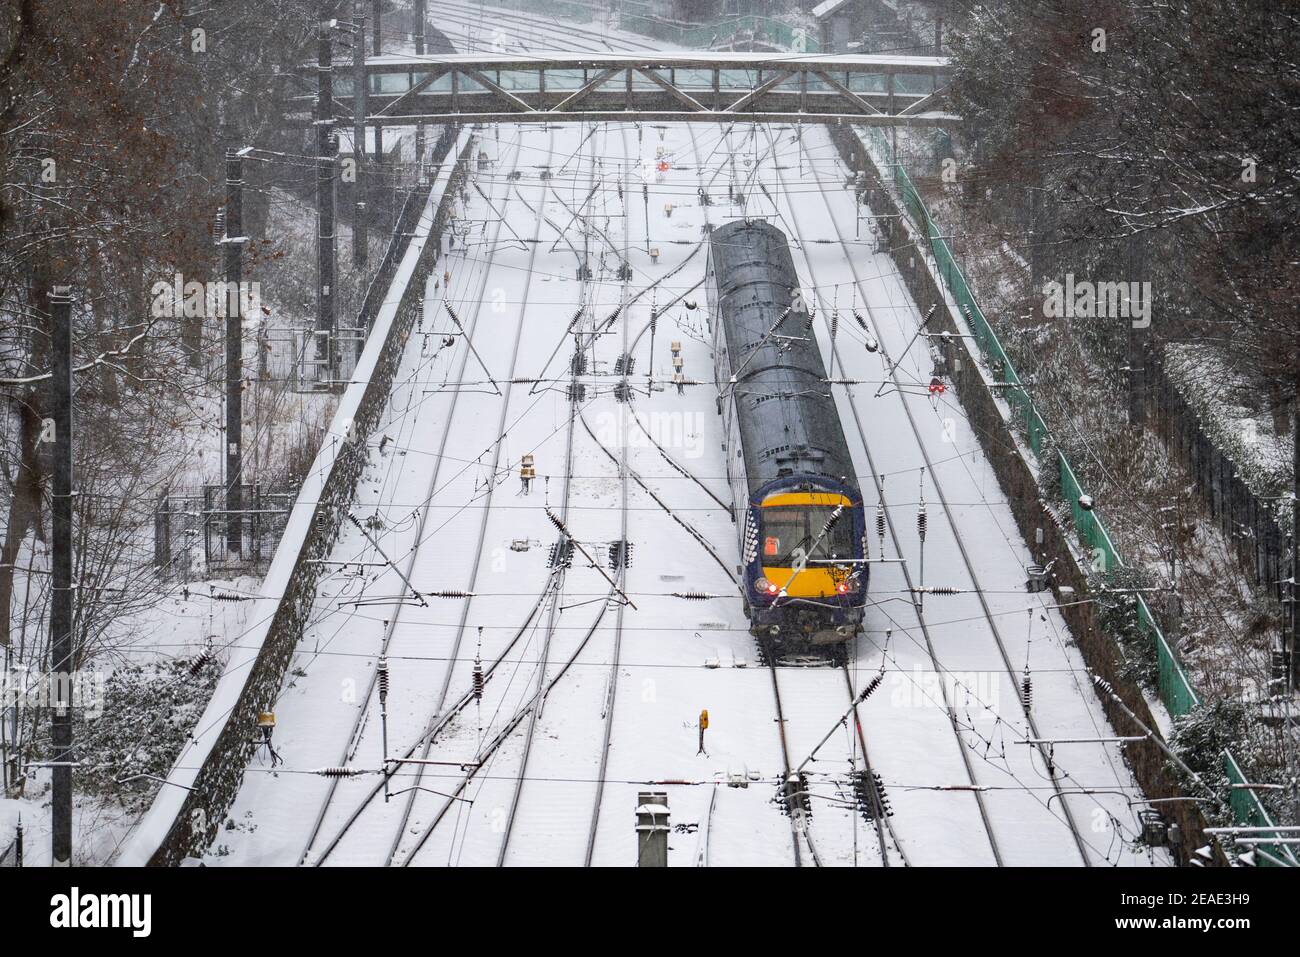 Edinburgh, Scotland, UK. 9 Feb 2021. Big freeze continues in the UK with Storm Darcy bringing several inches of snow to Edinburgh overnight. Pic; Train leaves Waverley Station. Iain Masterton/Alamy Live news Stock Photo